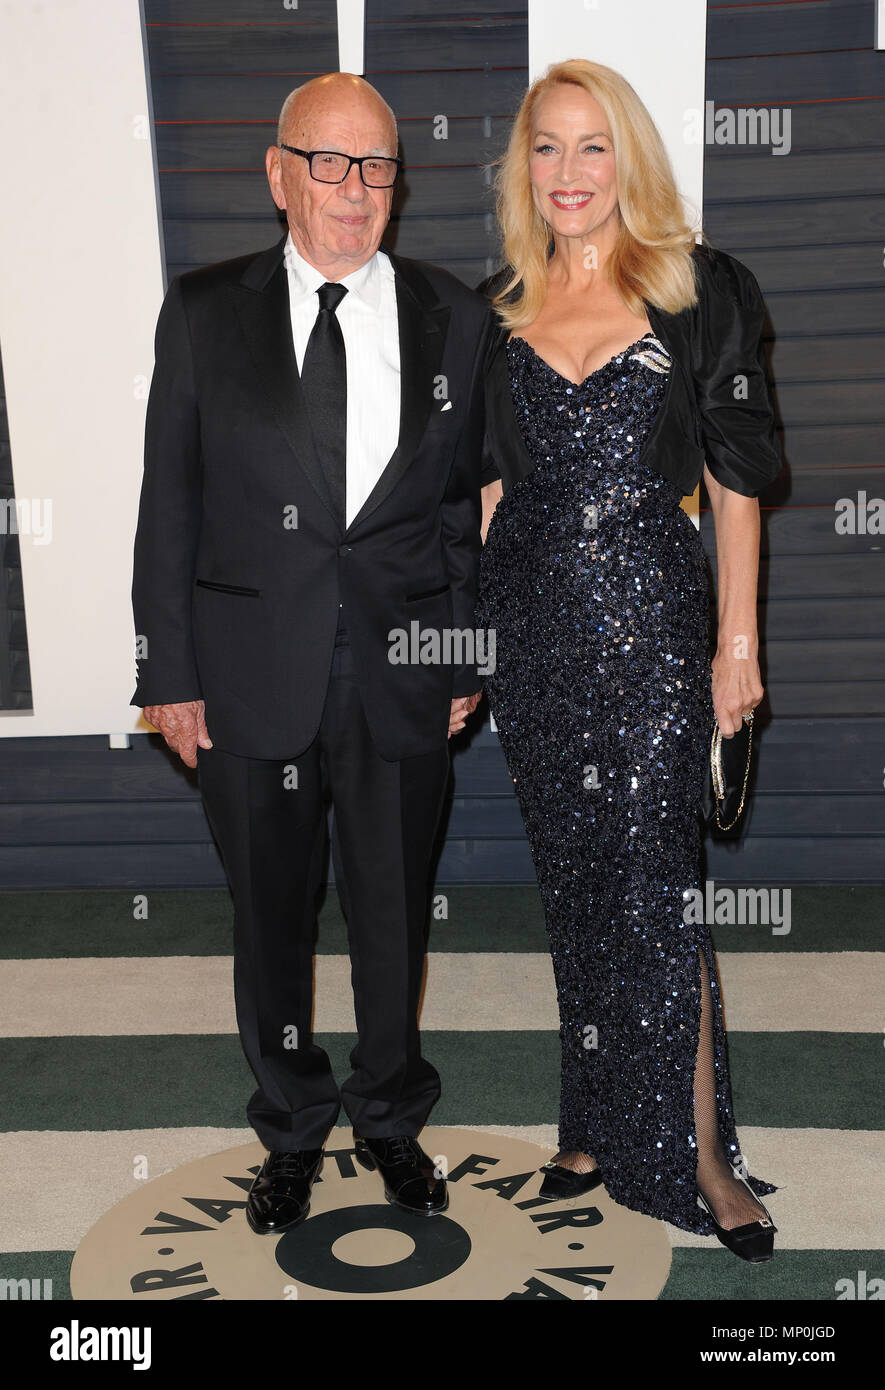 Rupert Murdoch, Jerry Hall  arriving at the Vanity Fair's Oscar Party 2016 at the Playhouse in Los Angeles. February 28, 2016. Rupert Murdoch, Jerry Hall  ------------- Red Carpet Event, Vertical, USA, Film Industry, Celebrities,  Photography, Bestof, Arts Culture and Entertainment, Topix Celebrities fashion /  Vertical, Best of, Event in Hollywood Life - California,  Red Carpet and backstage, USA, Film Industry, Celebrities,  movie celebrities, TV celebrities, Music celebrities, Photography, Bestof, Arts Culture and Entertainment,  Topix, vertical,  family from from the year , 2016, inquiry t Stock Photo